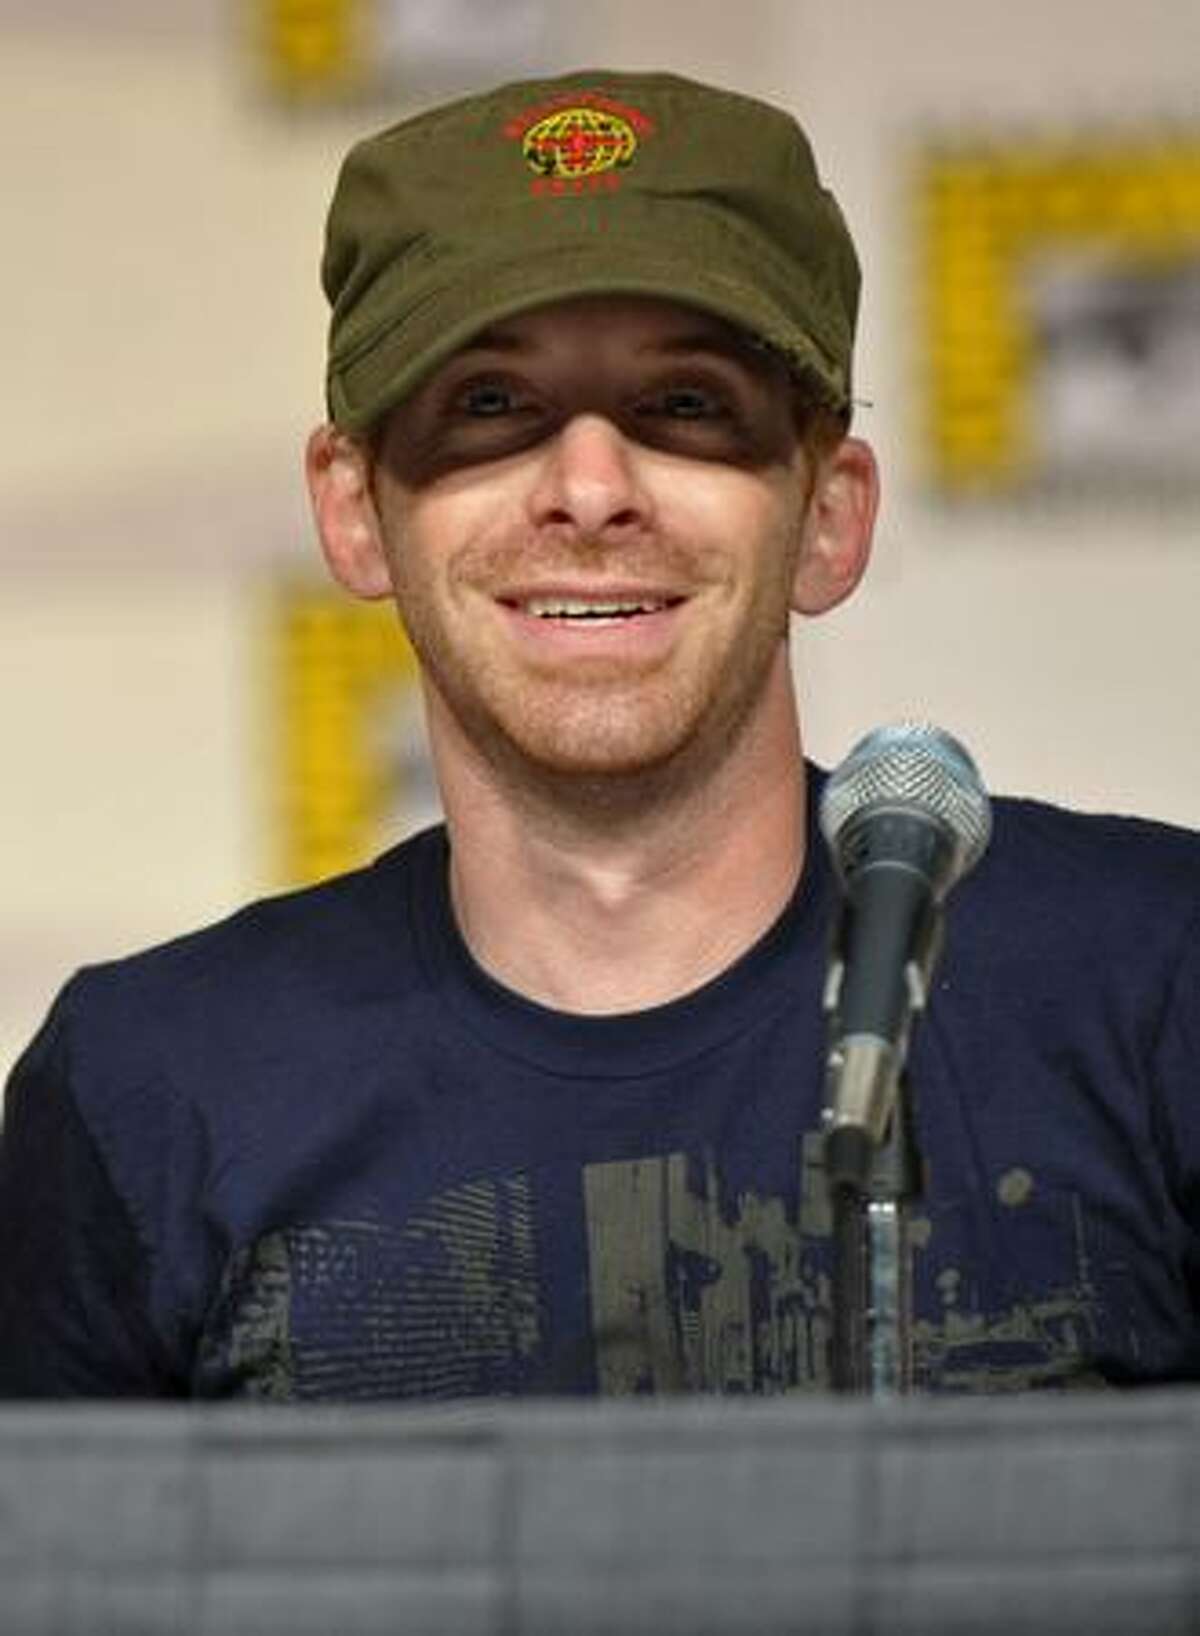 SAN DIEGO - JULY 25: Actor Seth Green speaks at the "Family Guy" panel discussion at Comic-Con 2009 held at San Diego Convention Center on July 25, 2009 in San Diego, California.